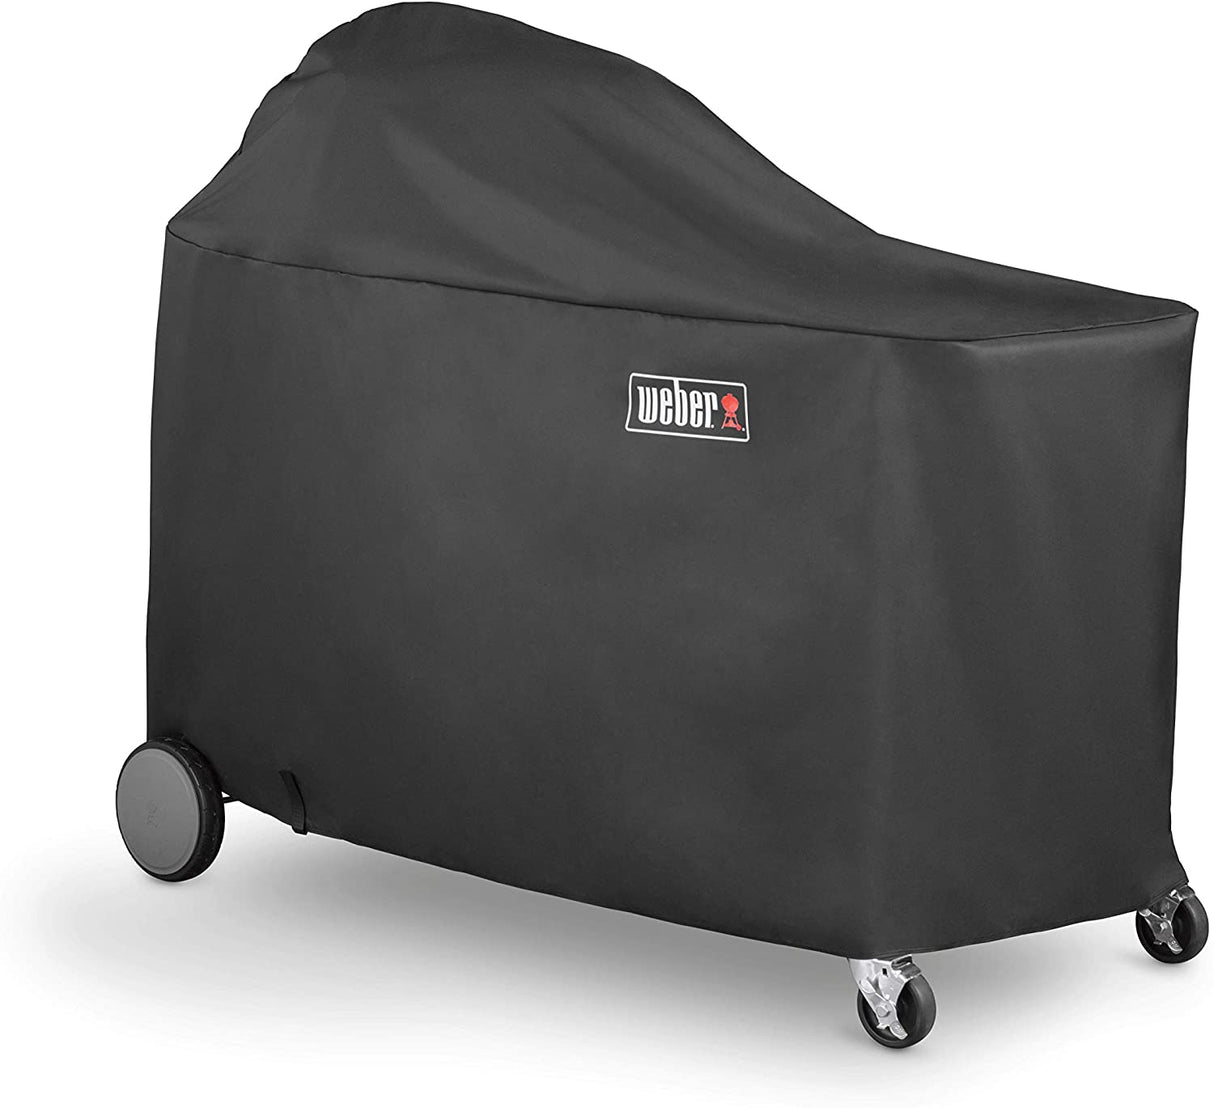 Weber 7174 Charcoal Grill Cover, Black - Texas Star Grill Shop